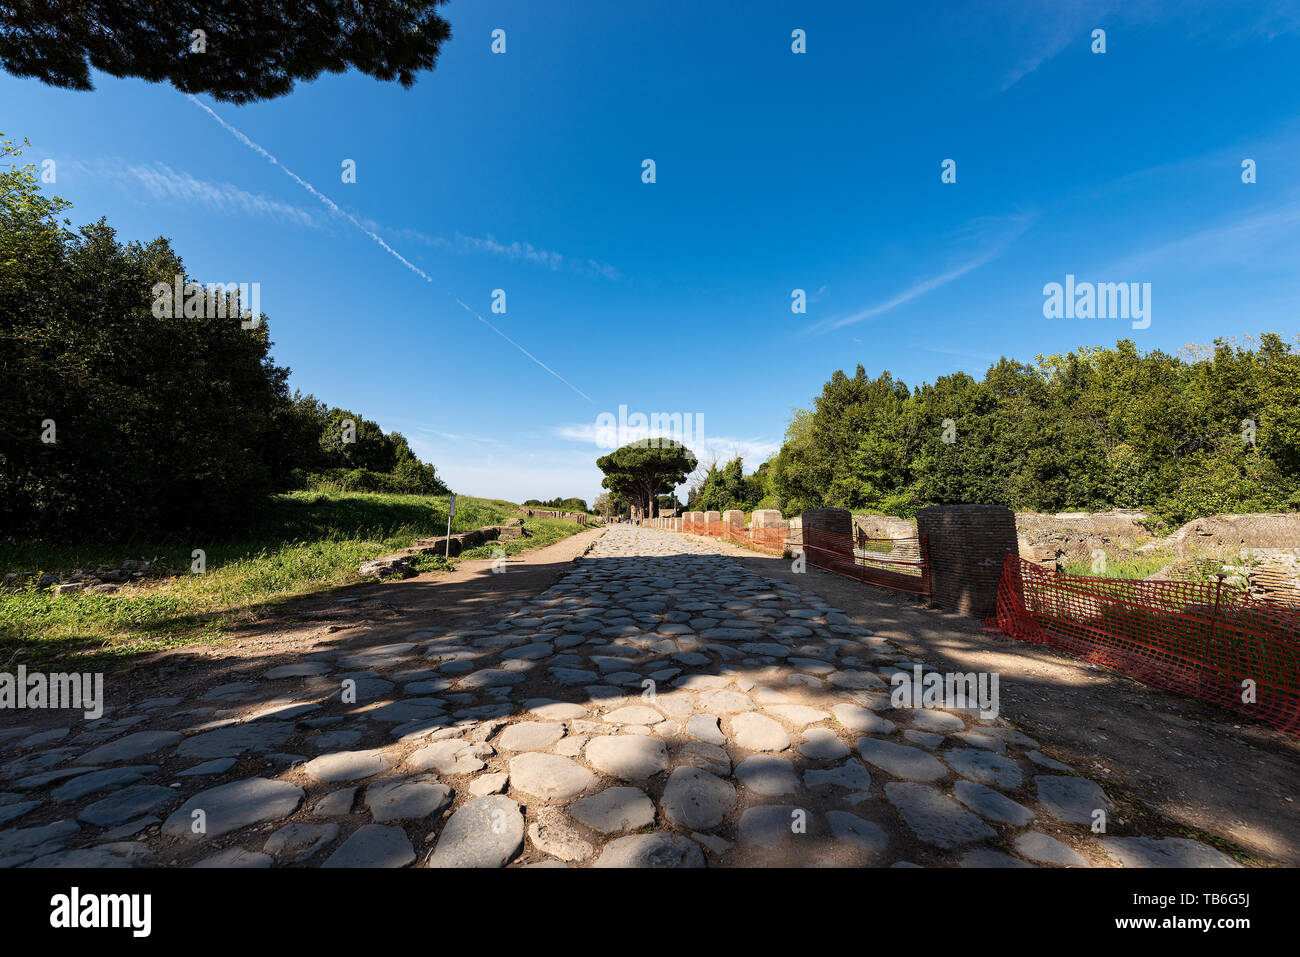 Decumanus Maximus, ancient Roman road in Ostia Antica, colony founded in the VII century BC. Archeological siteÂ in Rome, UNESCO world heritage site.  Stock Photo